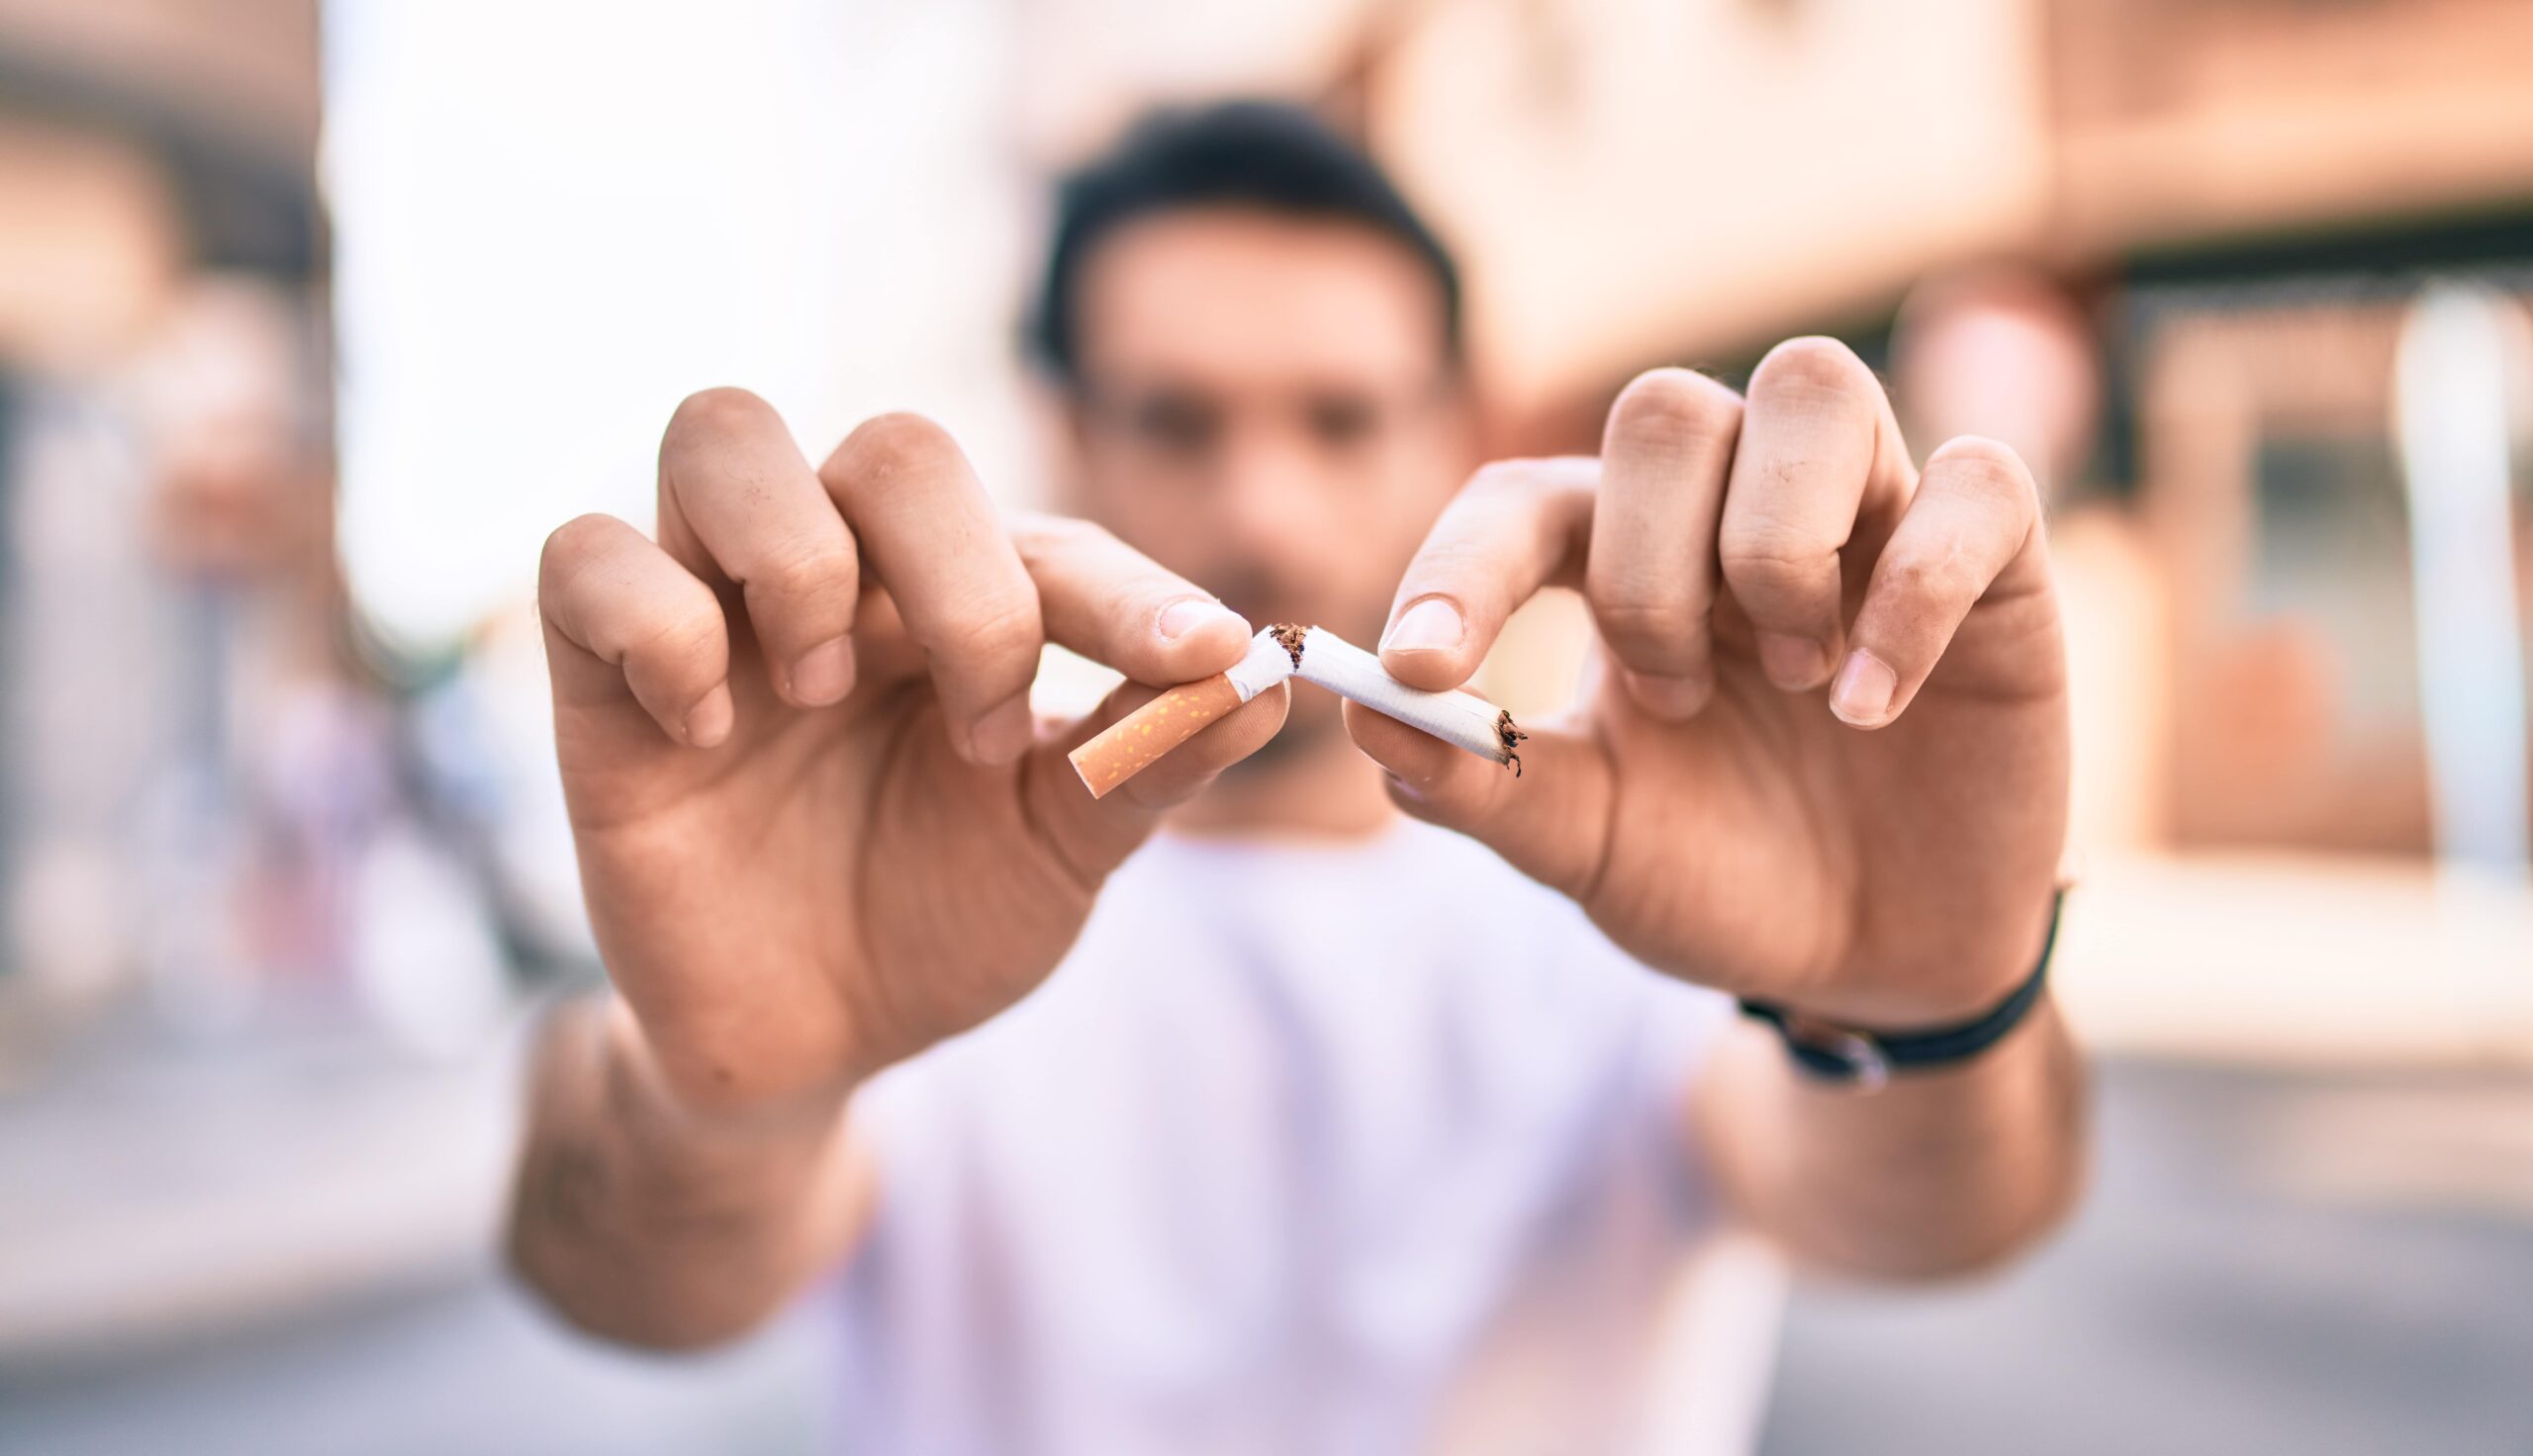 Fresh welcomes plans to create a smokefree future